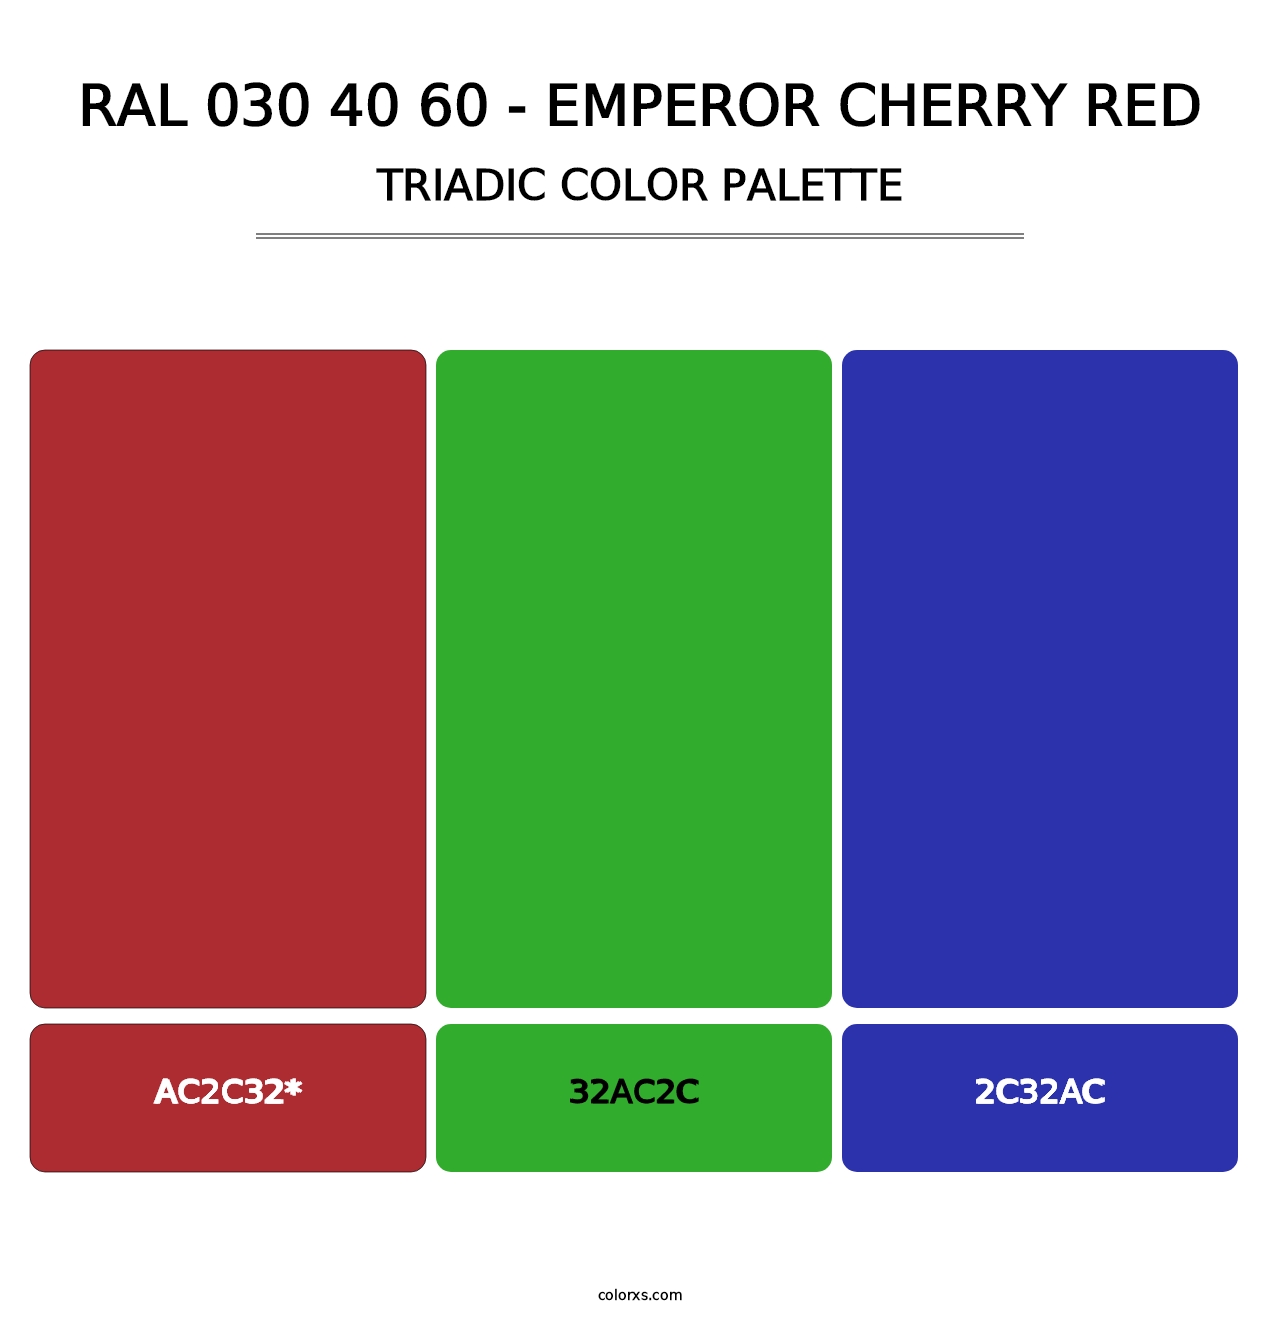 RAL 030 40 60 - Emperor Cherry Red - Triadic Color Palette